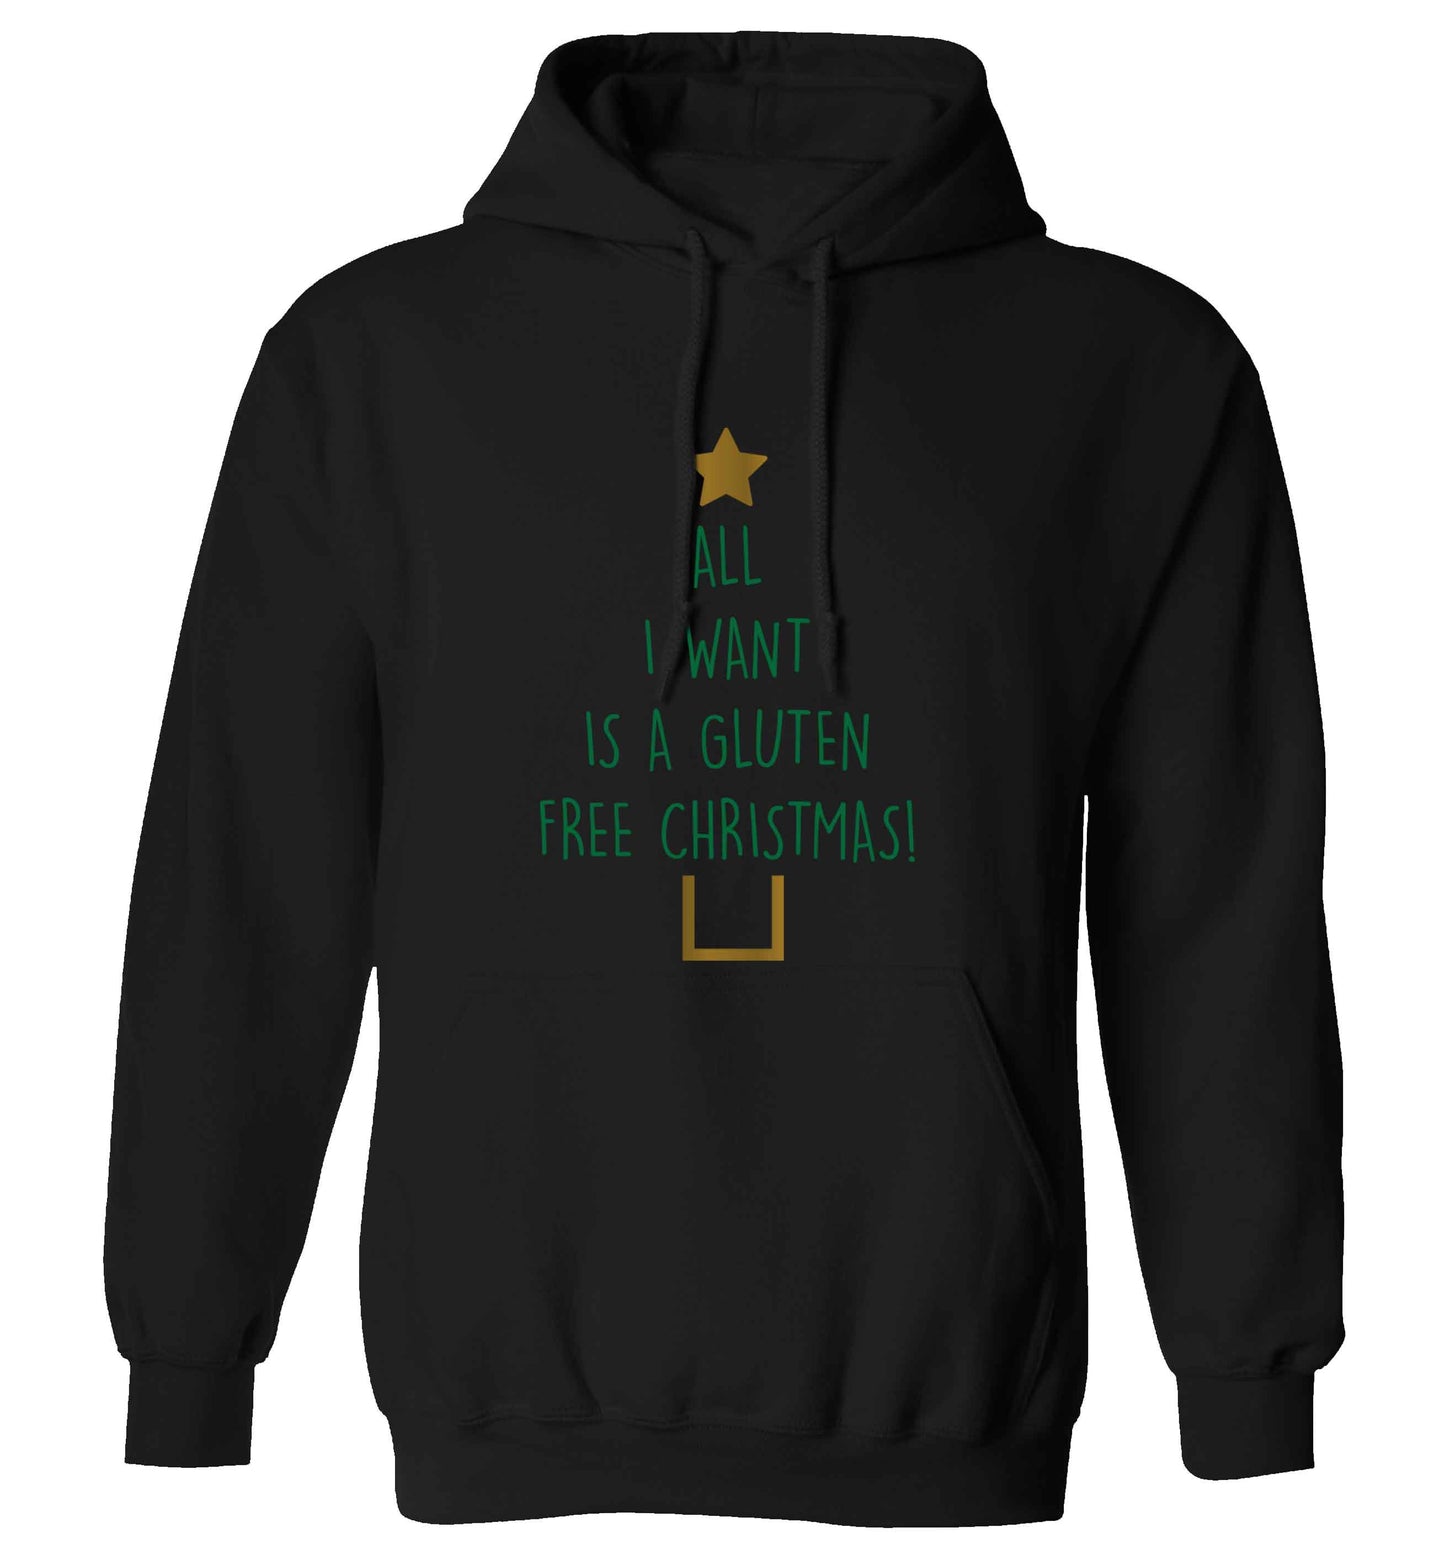 All I want is a gluten free Christmas adults unisex black hoodie 2XL